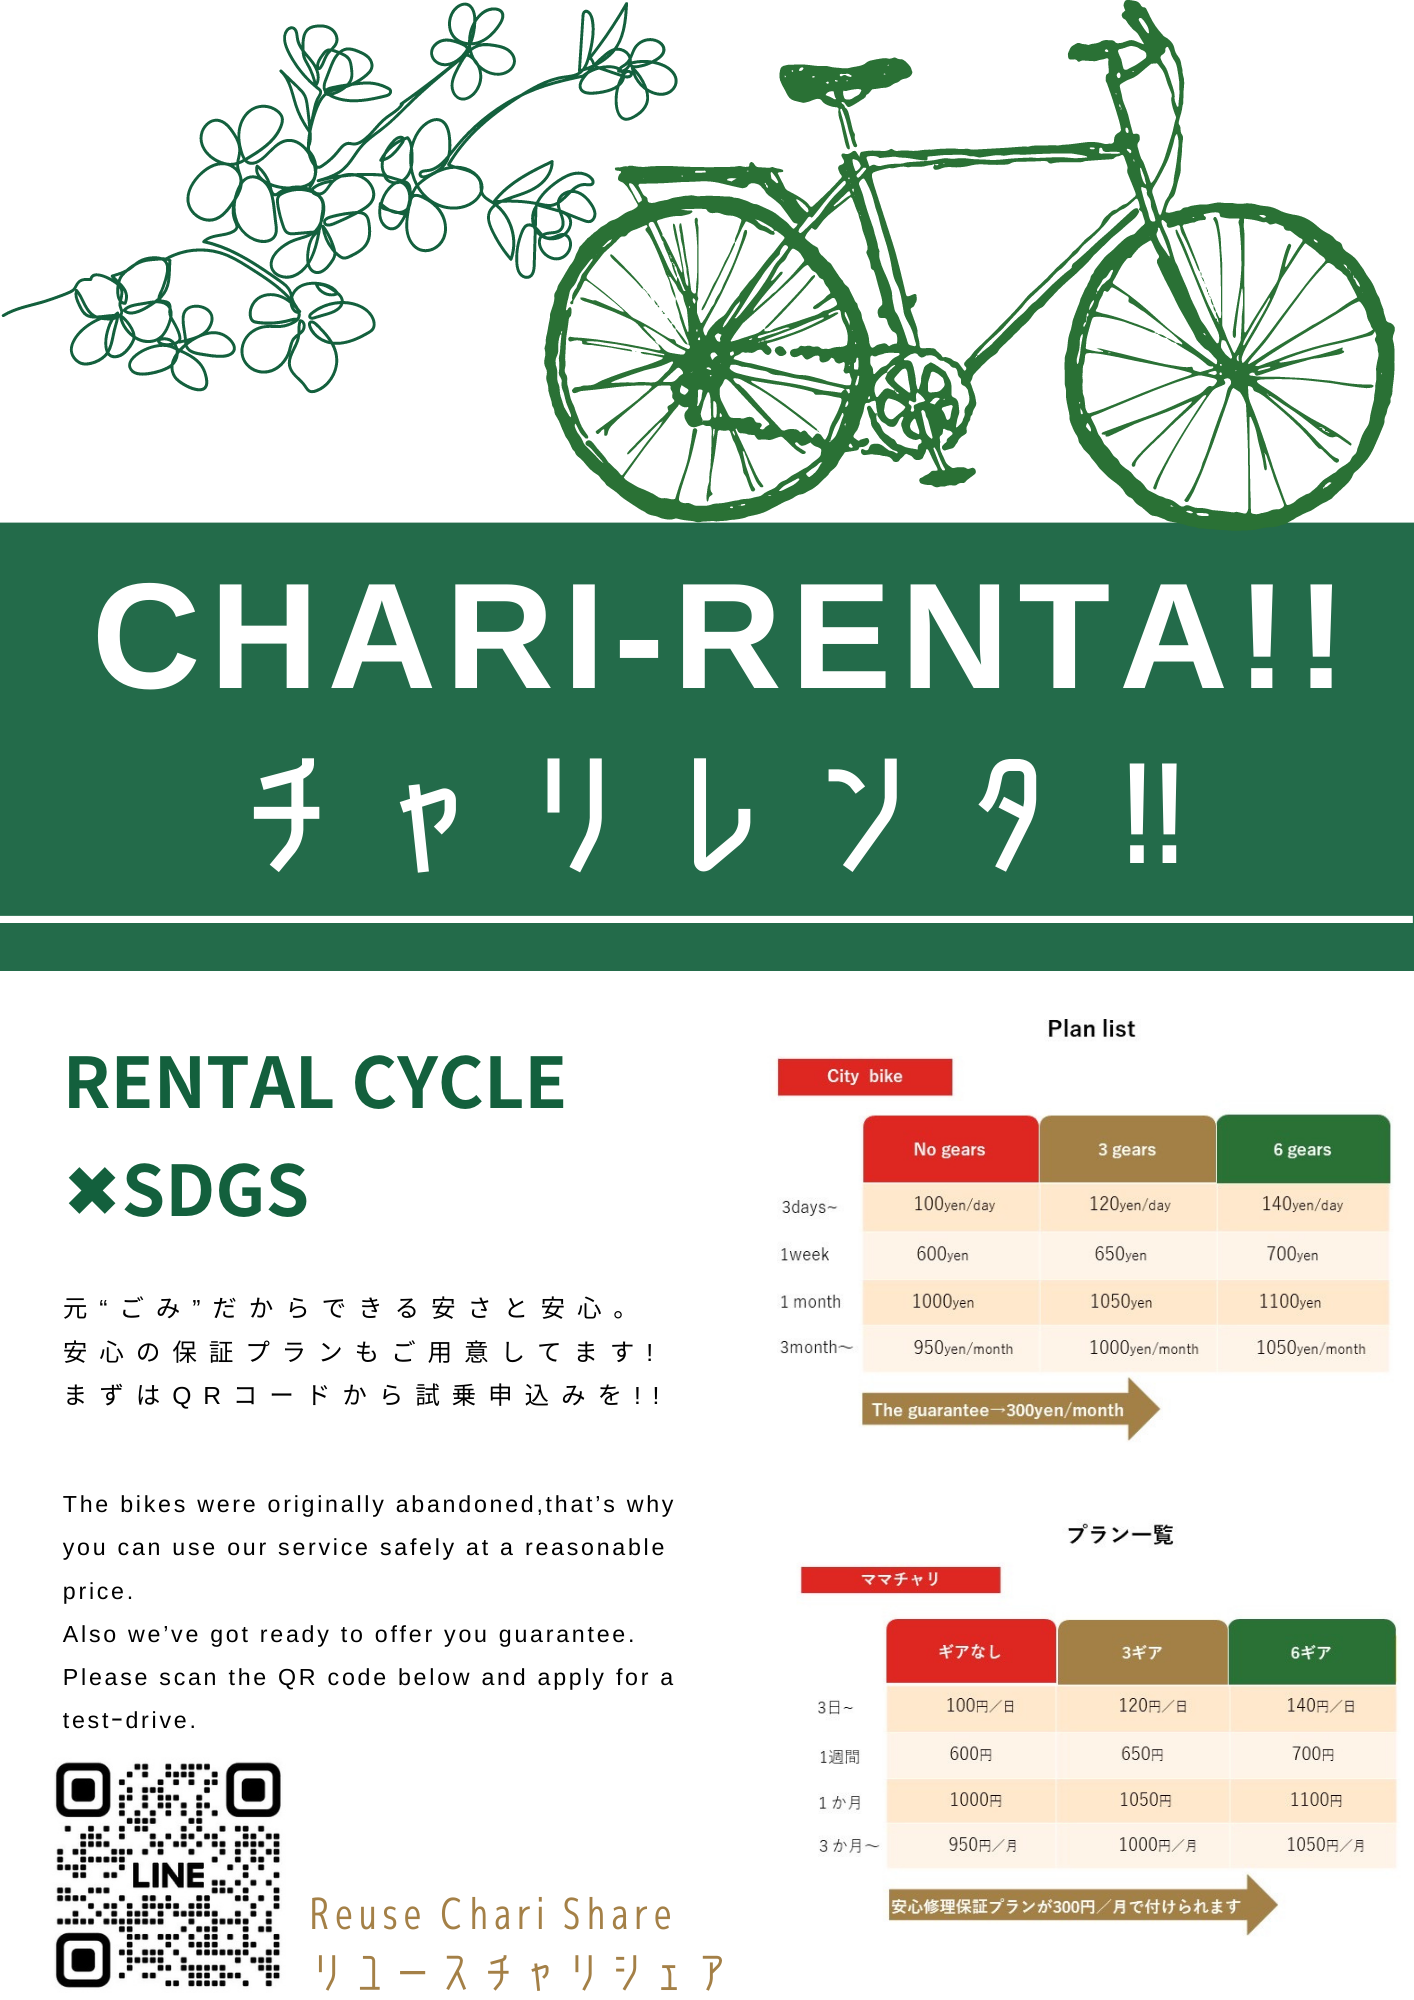 Wait a minute to buy a new bicycle!! How about renting a bike from us? 自転車買うのはちょっと待った!! レンタサイクルはいかがですか？【リユースチャリシェア Reuse Chari Share】